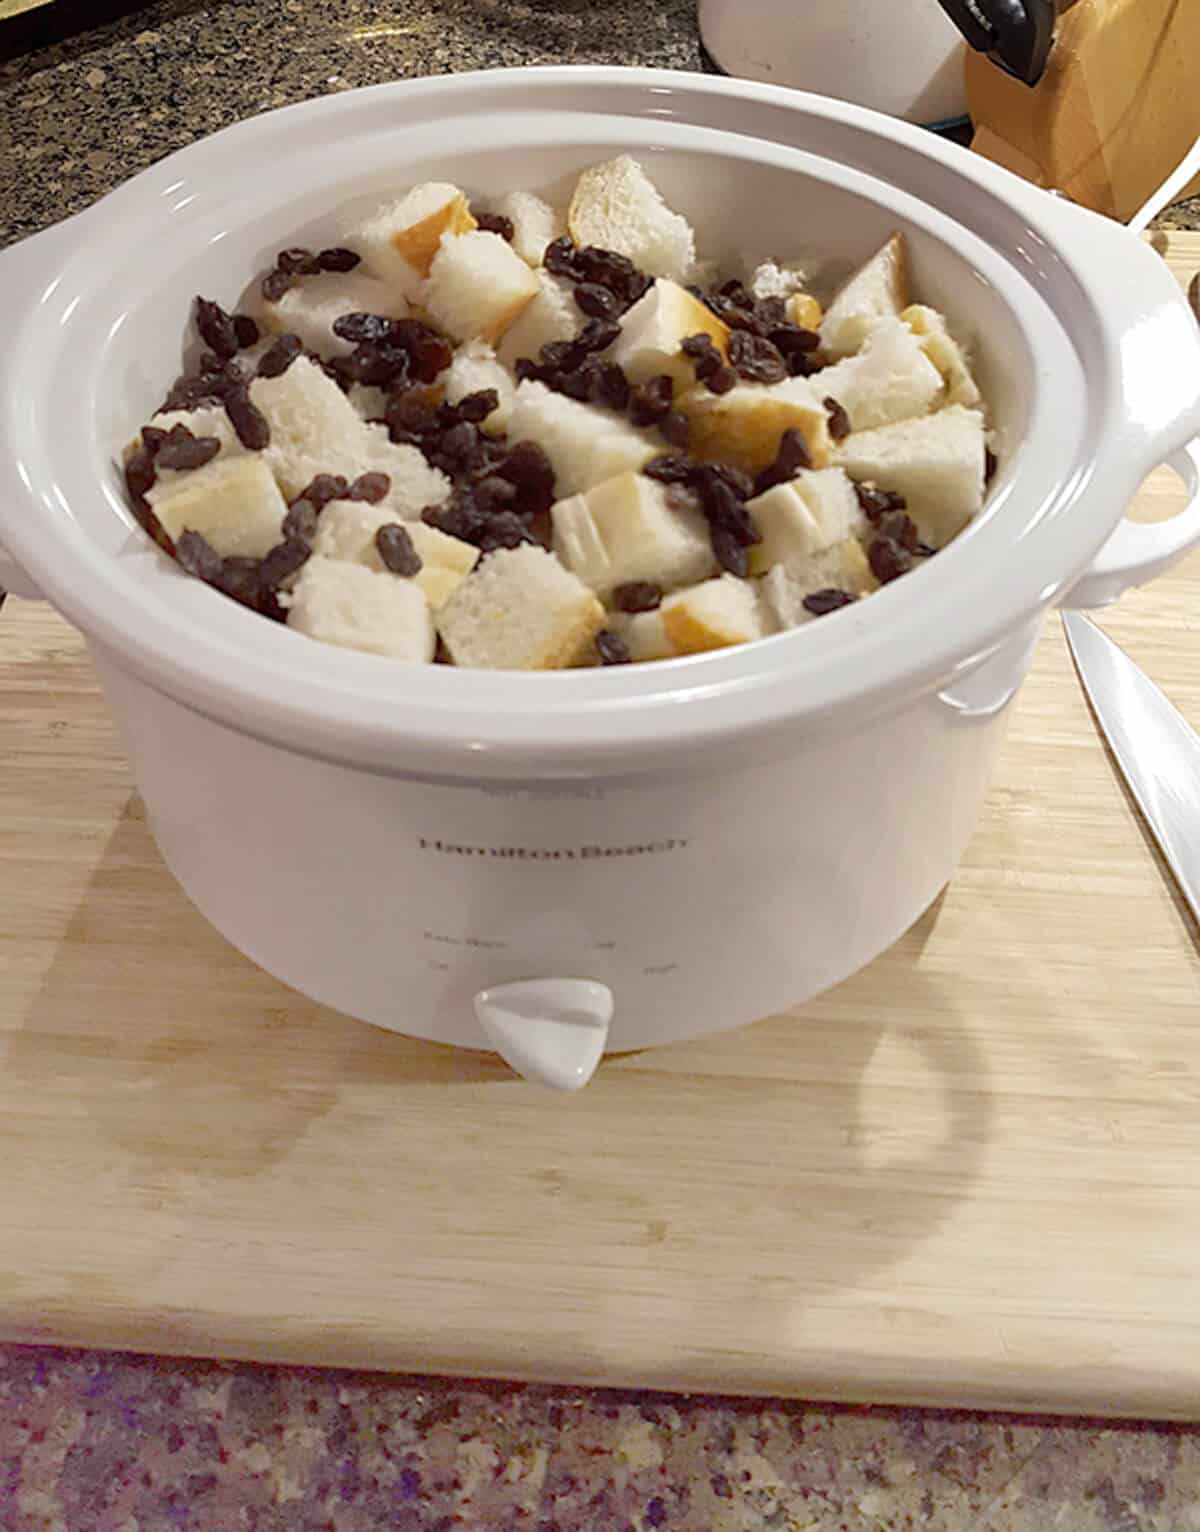 Bread cubes and raisins in a small slow cooker.